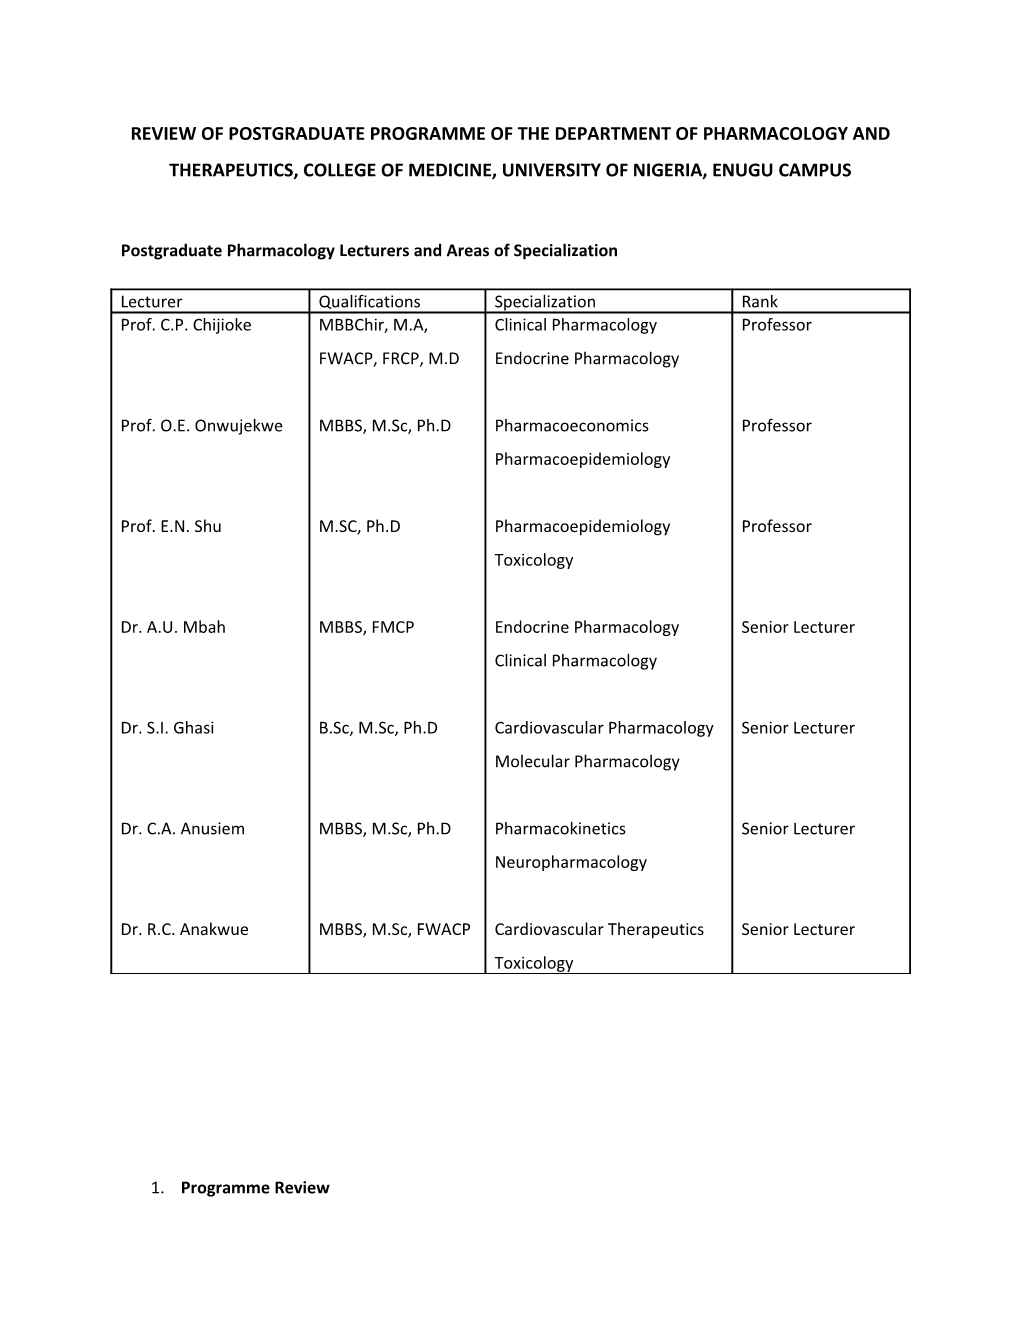 Postgraduate Pharmacology Lecturers and Areas of Specialization